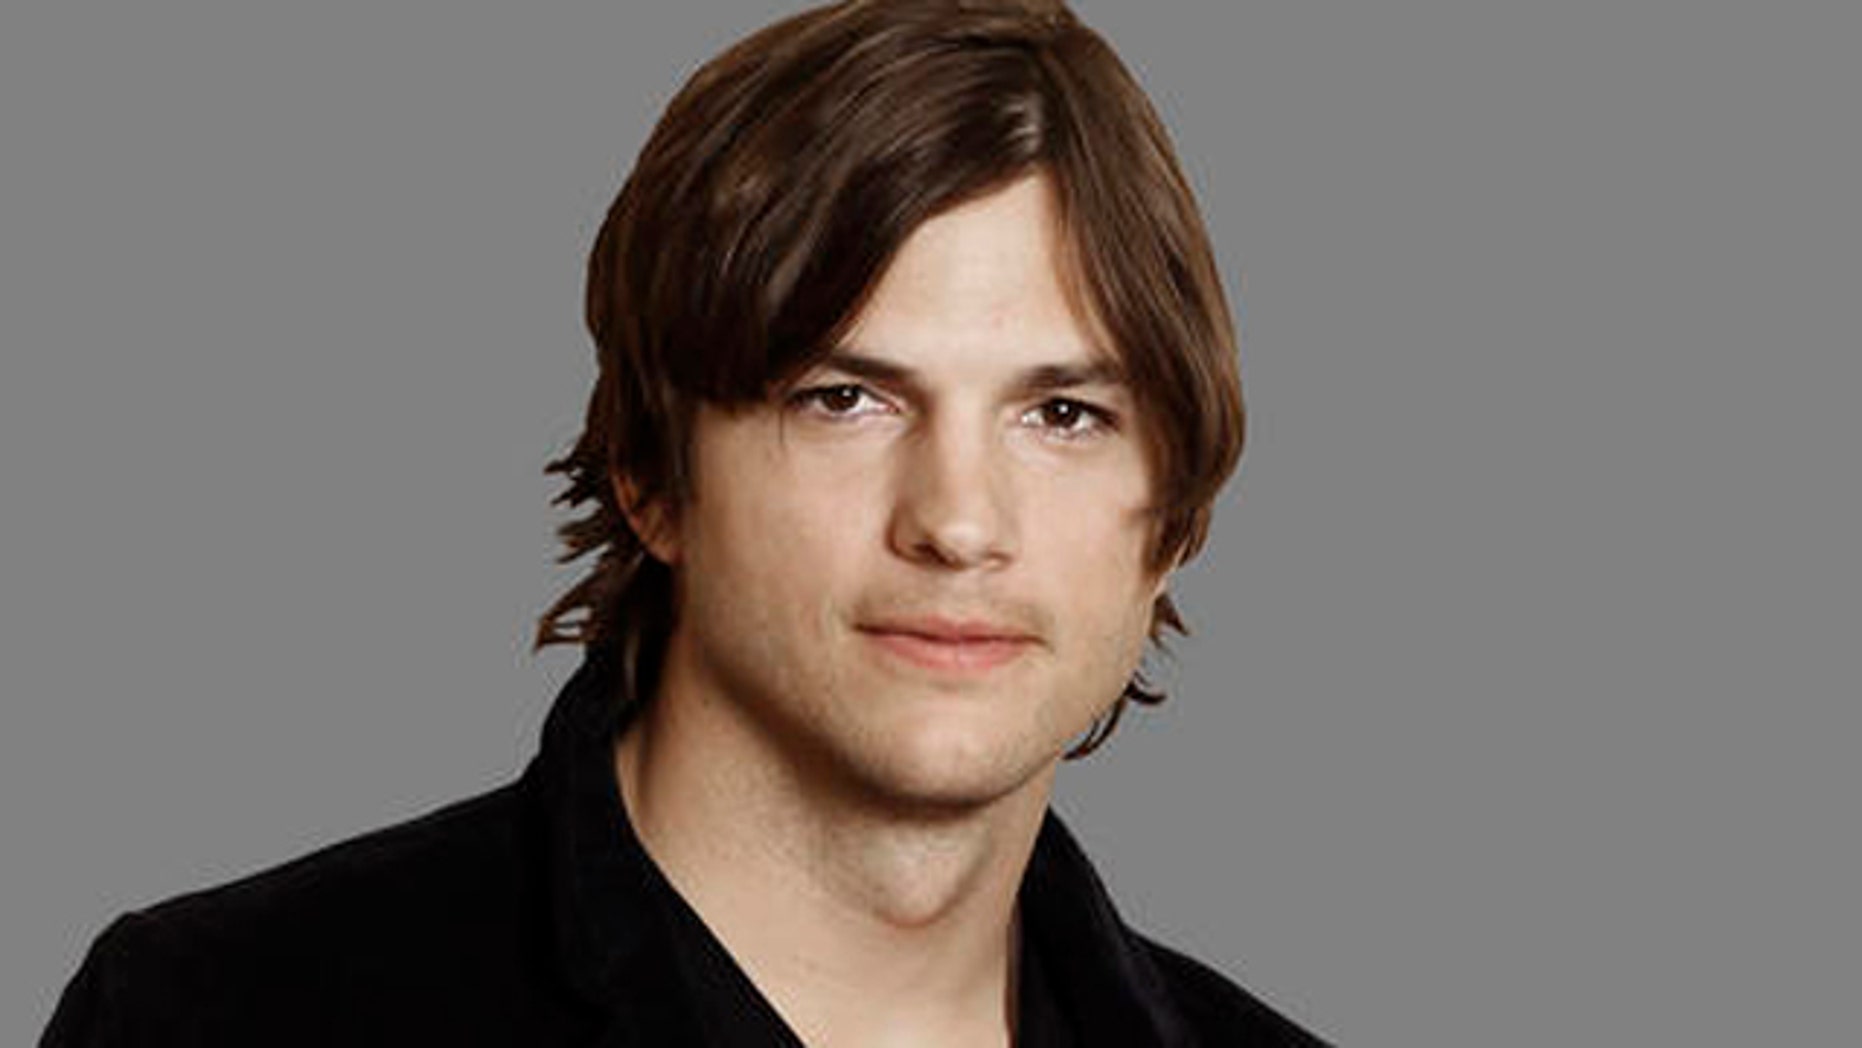 Ashton Kutcher To Replace Charlie Sheen On Two And A Half Men At Half